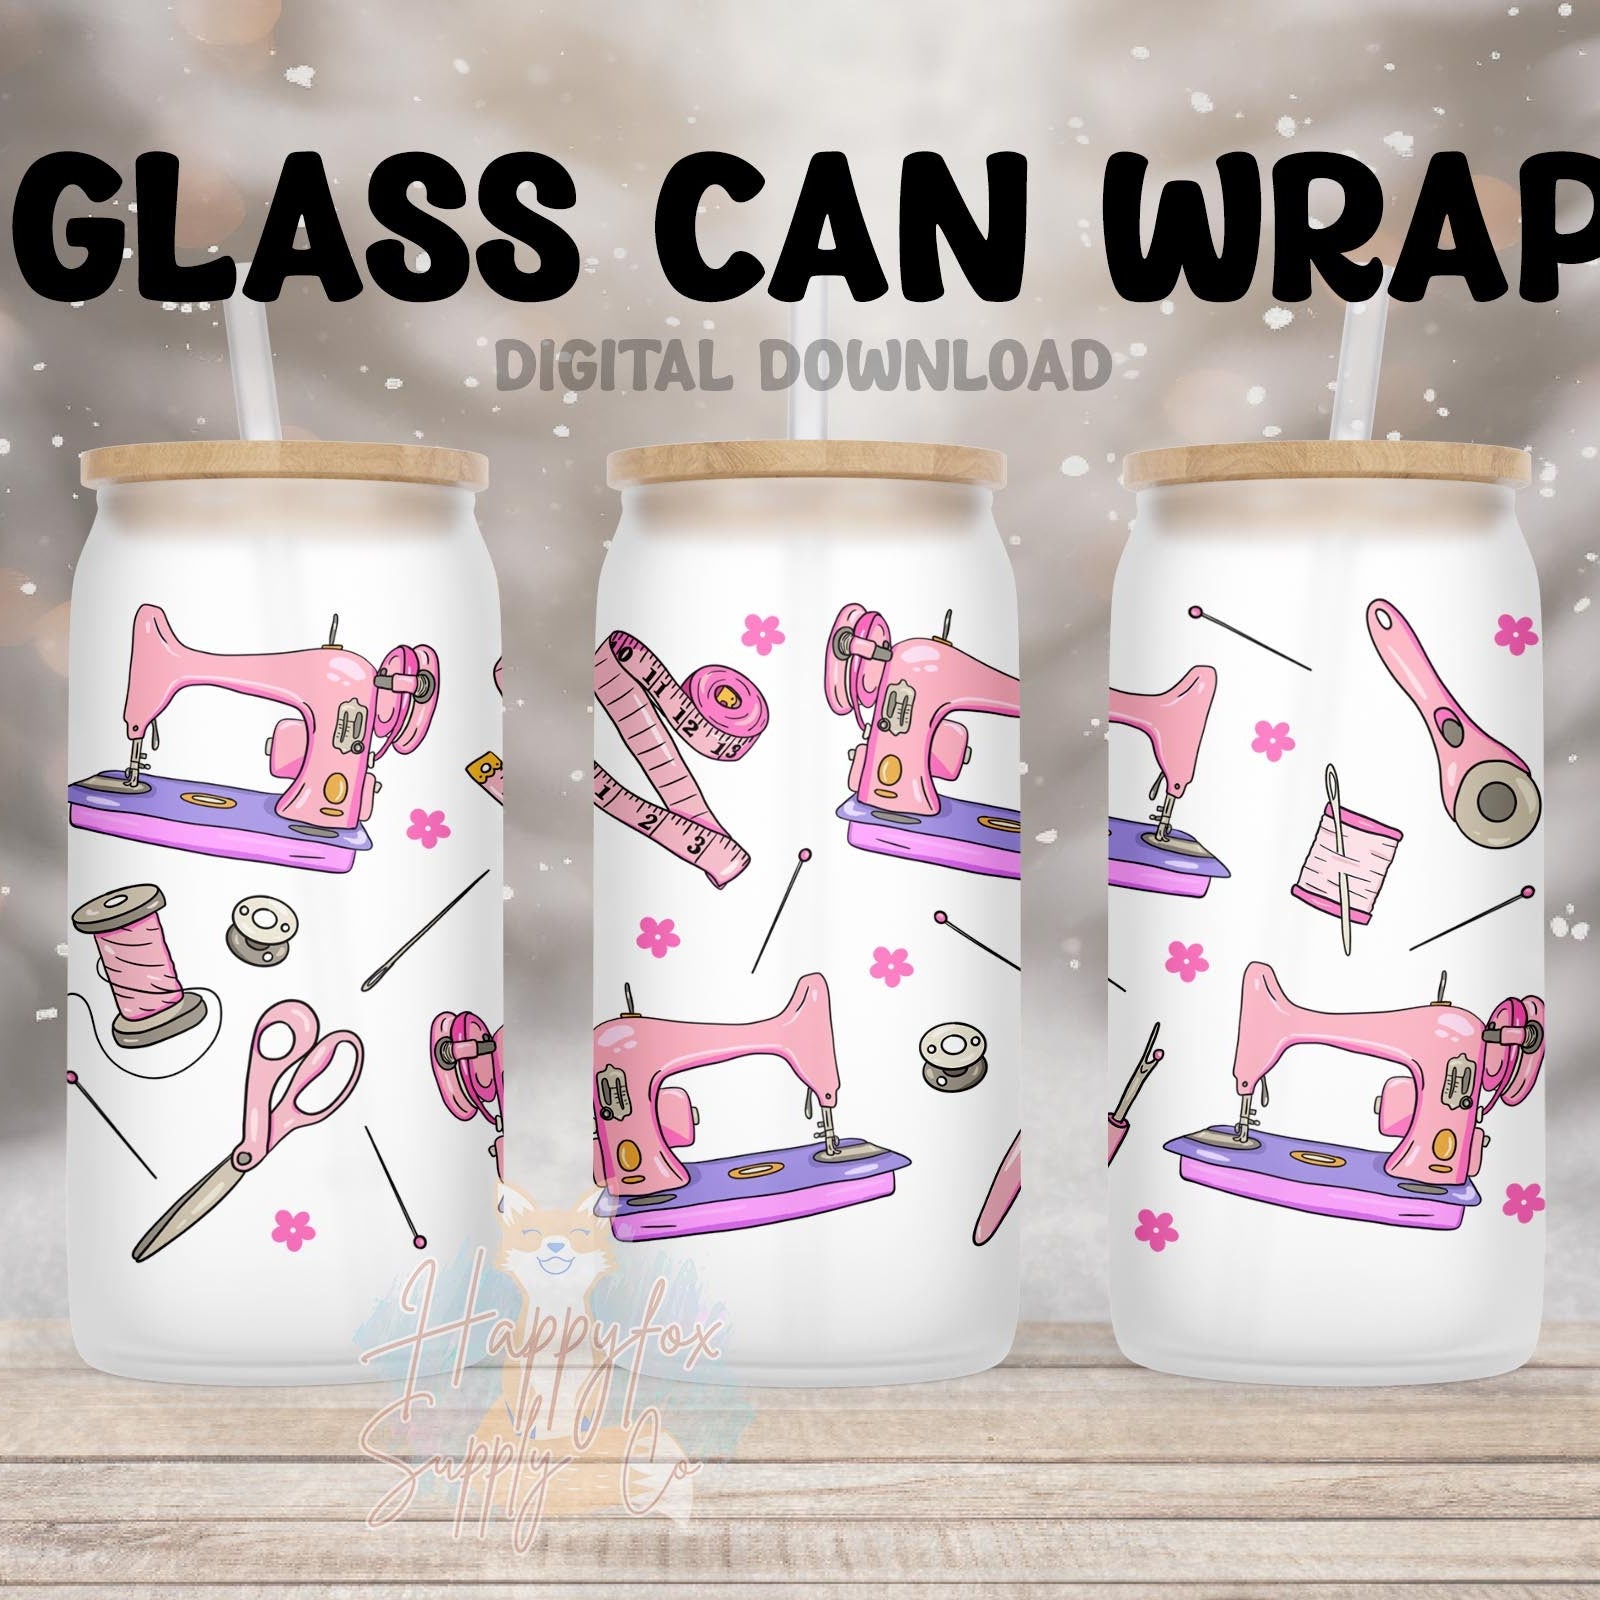 Digital Download 16oz Glass Can Wrap 300 DPI .PNG Sewing Machines UVDTF Sublimation Printed Vinyl Transparent 16oz Wrap Seamstress Sewer